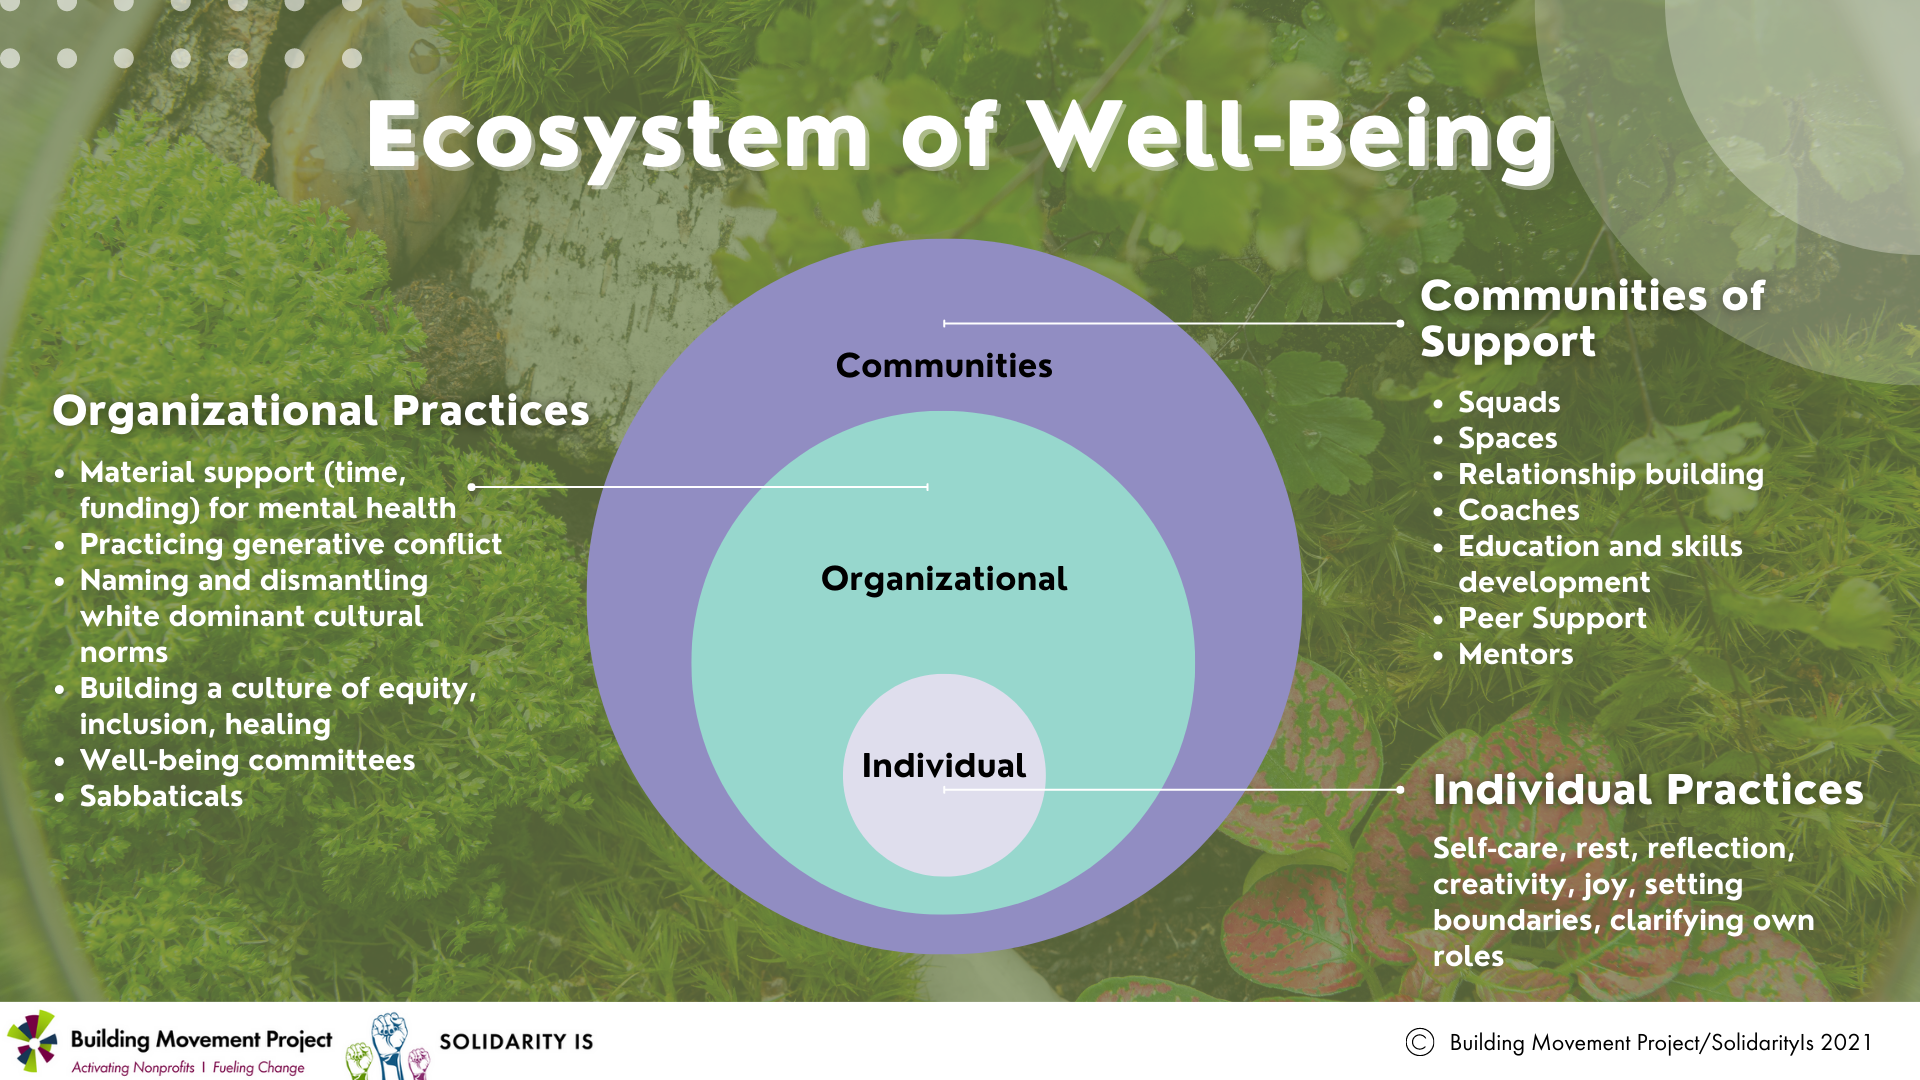 Header reads "Ecosystem of Well-Being”. The background is a close-up of greenery in a terrarium. There are three concentric circles, with the smallest light purple circle labeled “Individual,” the next light blue circle labeled “Organizational,” and the largest dark purple circle labeled “Communities.” Each circle corresponds to a text box that reads as follows. “Individual practices: Self-care, rest, reflection, creativity, joy, setting boundaries, clarifying own roles.” “Organizational practices: Material support (time, funding) for mental health; Practicing generative conflict; Naming and dismantling white dominant cultural norms; Building a culture of equity, inclusion, healing; Well-being committees; Sabbaticals.” “Communities of support: Squads; Spaces; Relationship building; Coaches; Education and skills development; Peer Support; Mentors”. At the bottom of the graphic, the Building Movement Project and Solidarity Is logos are pictured. The footer text reads “Copyright Building Movement Project/Solidarity Is 2021”.